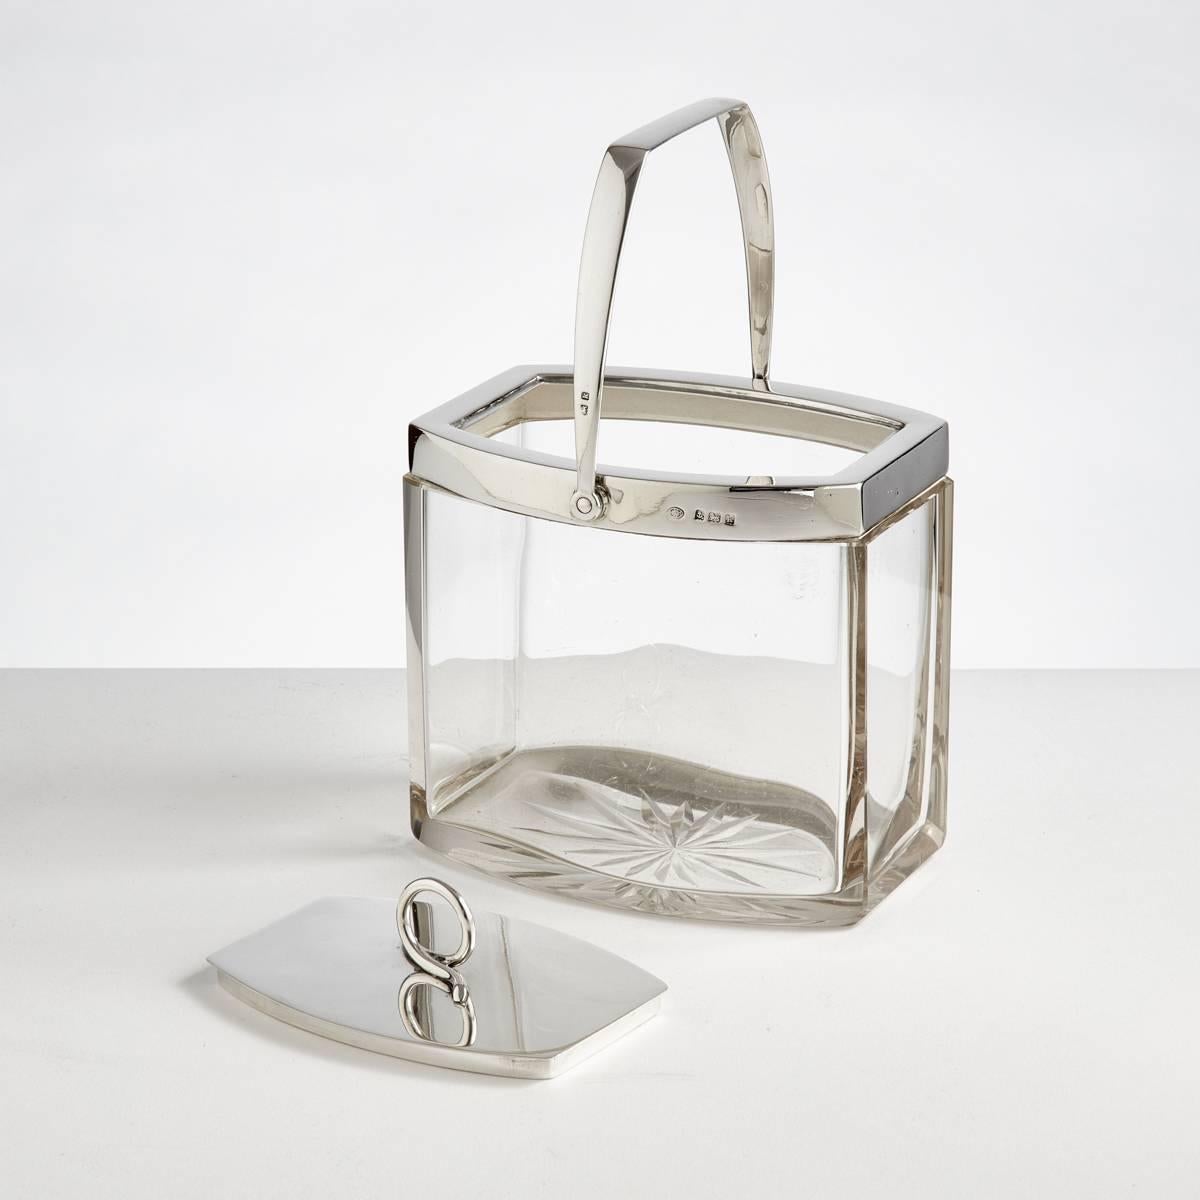 Art Deco silver and glass ice bucket dated Birmingham 1923 by makers Hukin & Heath. 

Would make the perfect gift. 

The images also show both this item & a similar one, again by Hukin & Heath, which is available in a separate listing.